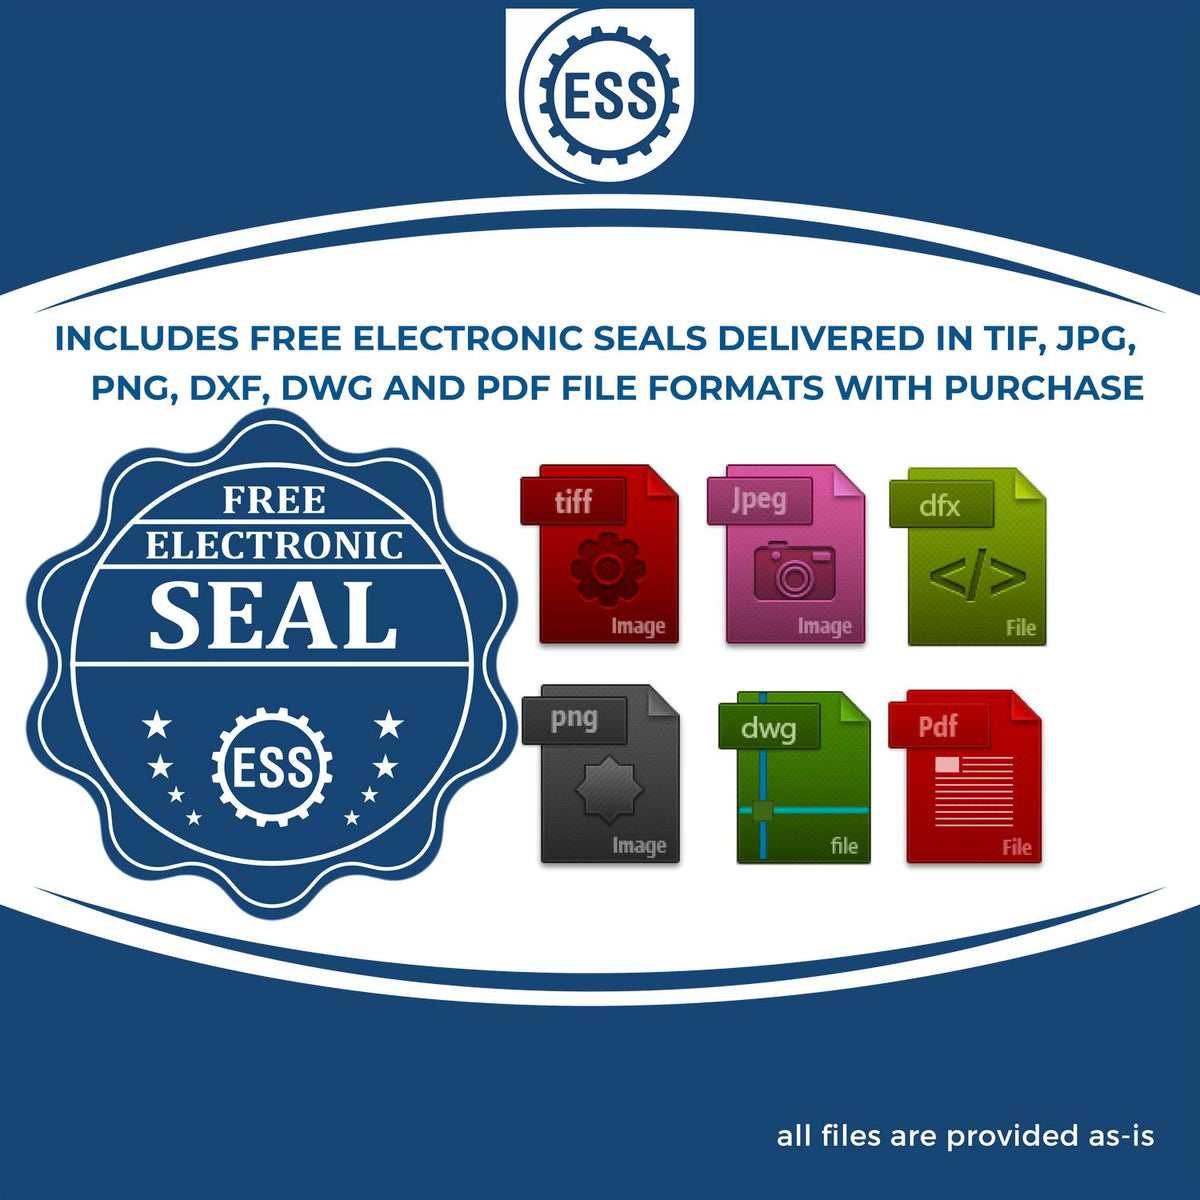 An infographic for the free electronic seal for the Self-Inking Pennsylvania Landscape Architect Stamp illustrating the different file type icons such as DXF, DWG, TIF, JPG and PNG.